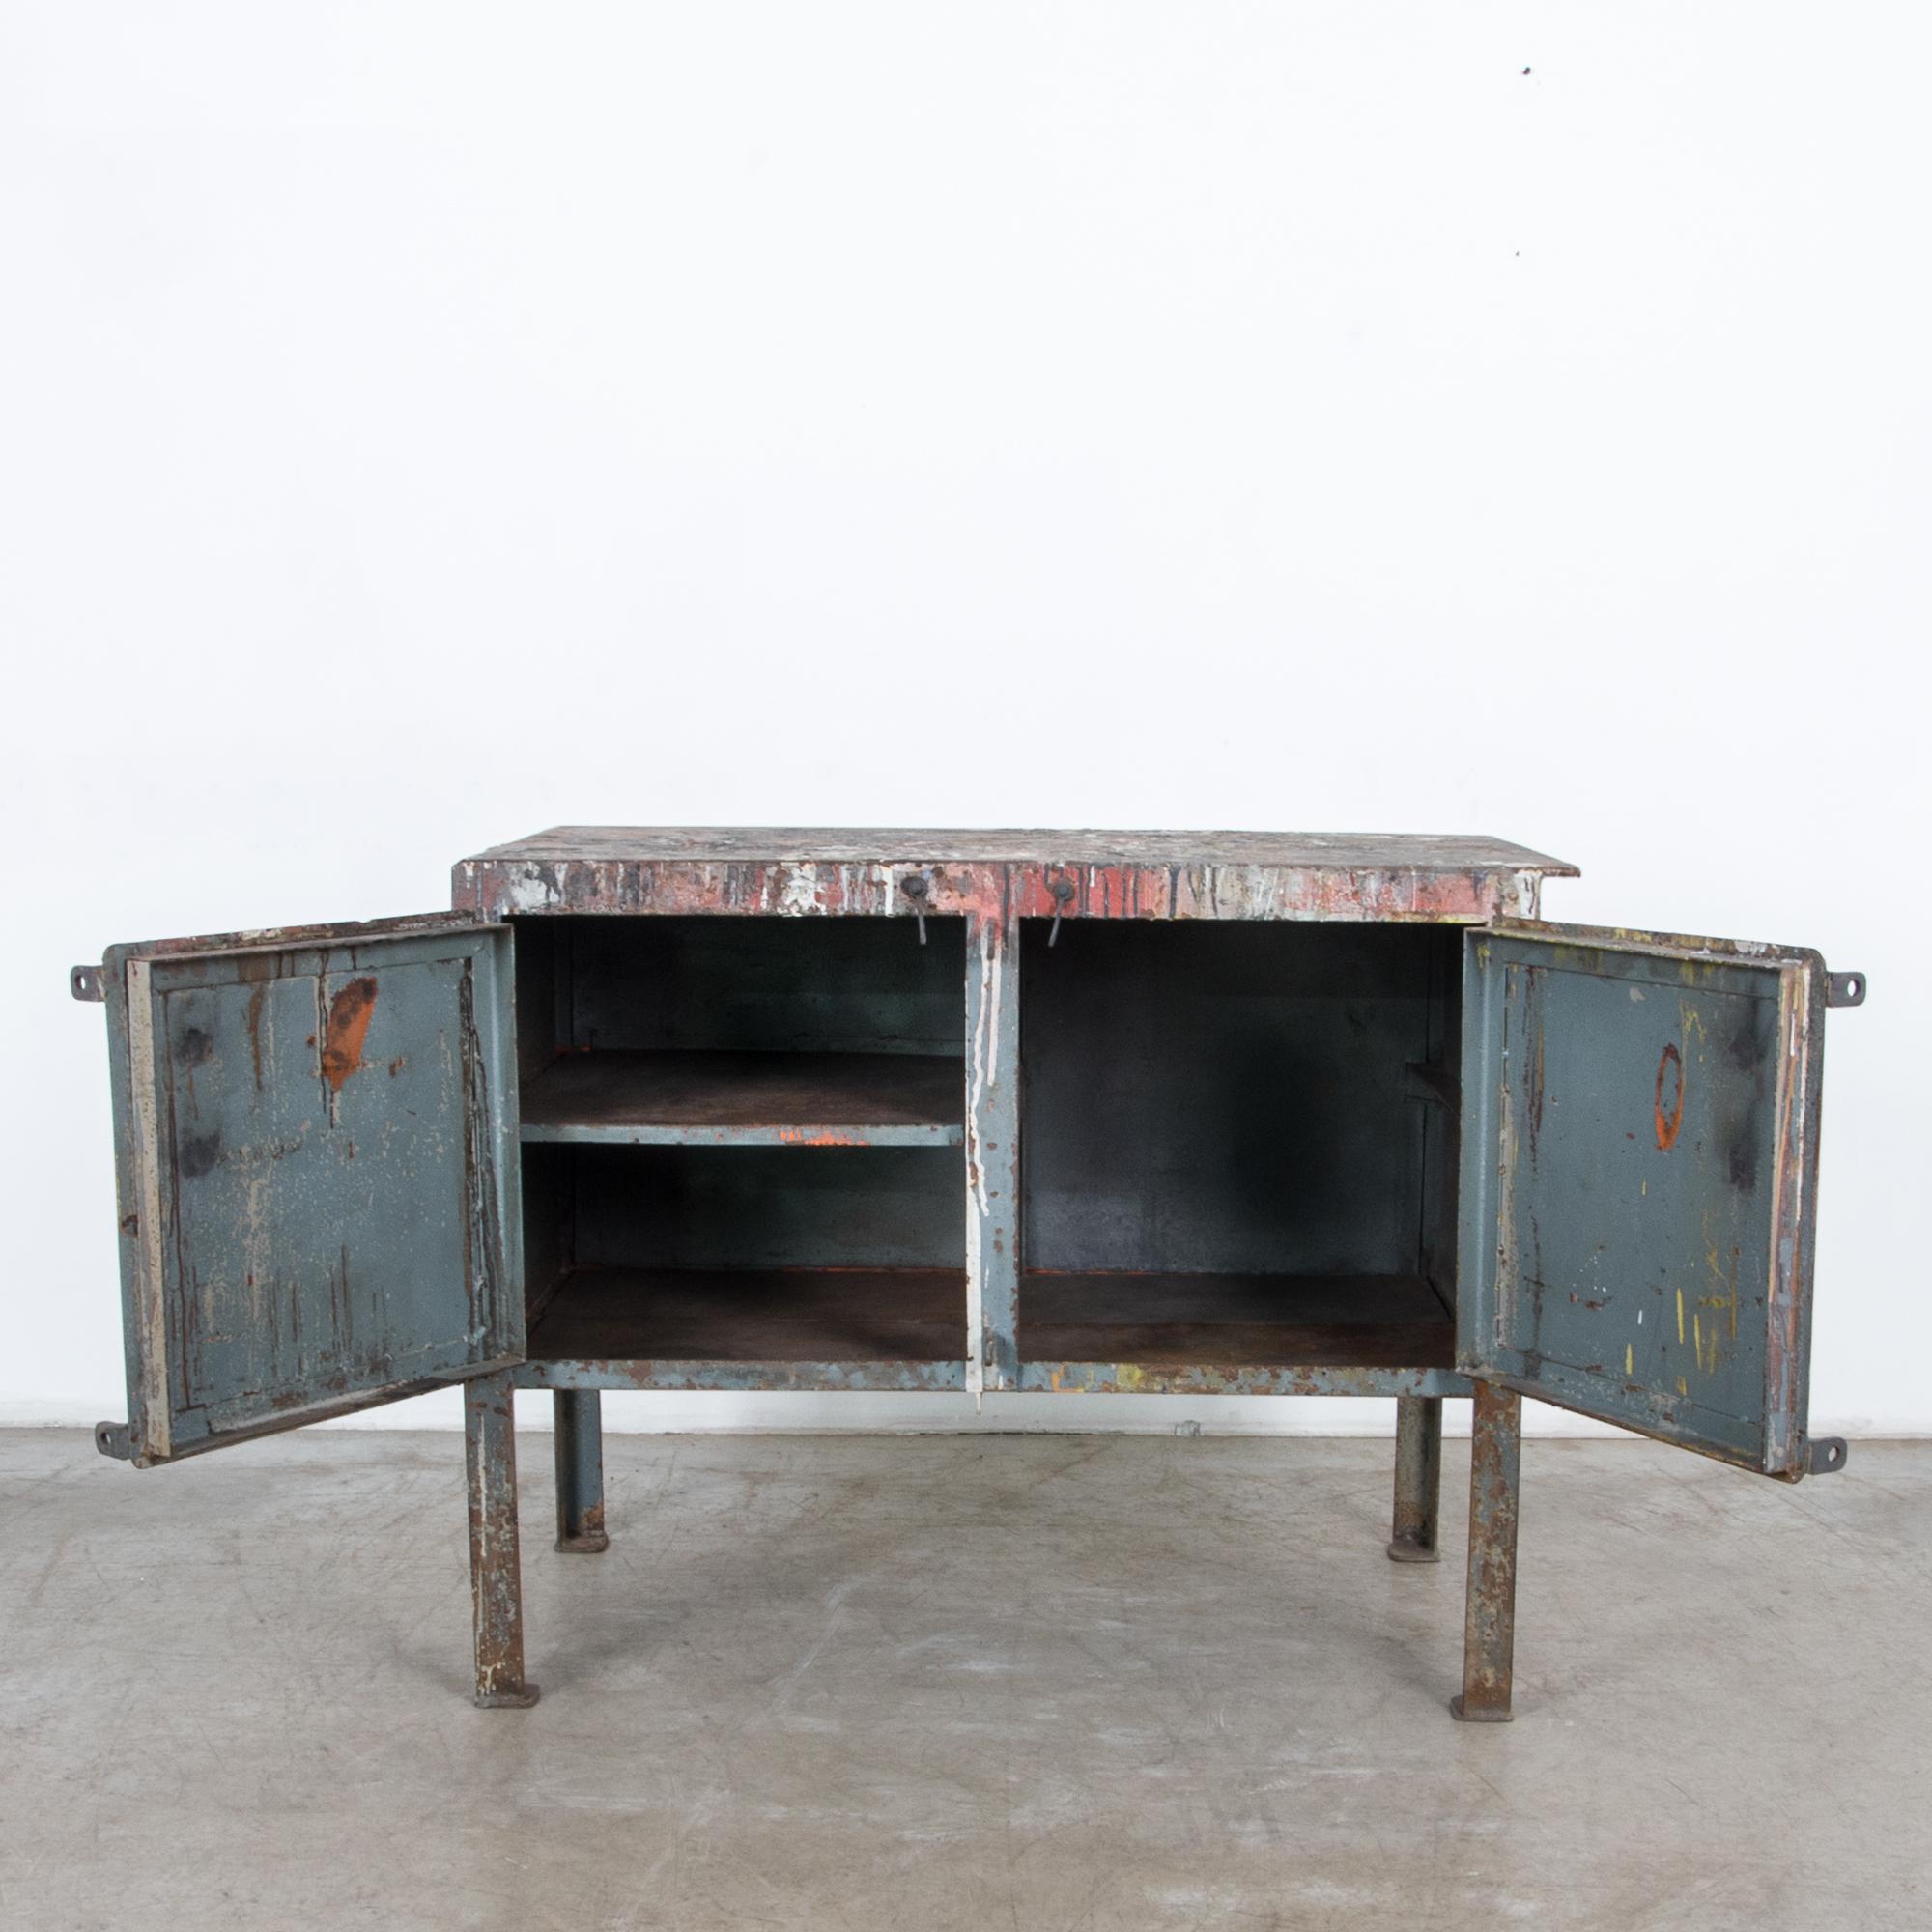 Steel Early 20th Century French Industrial Storage Cabinet